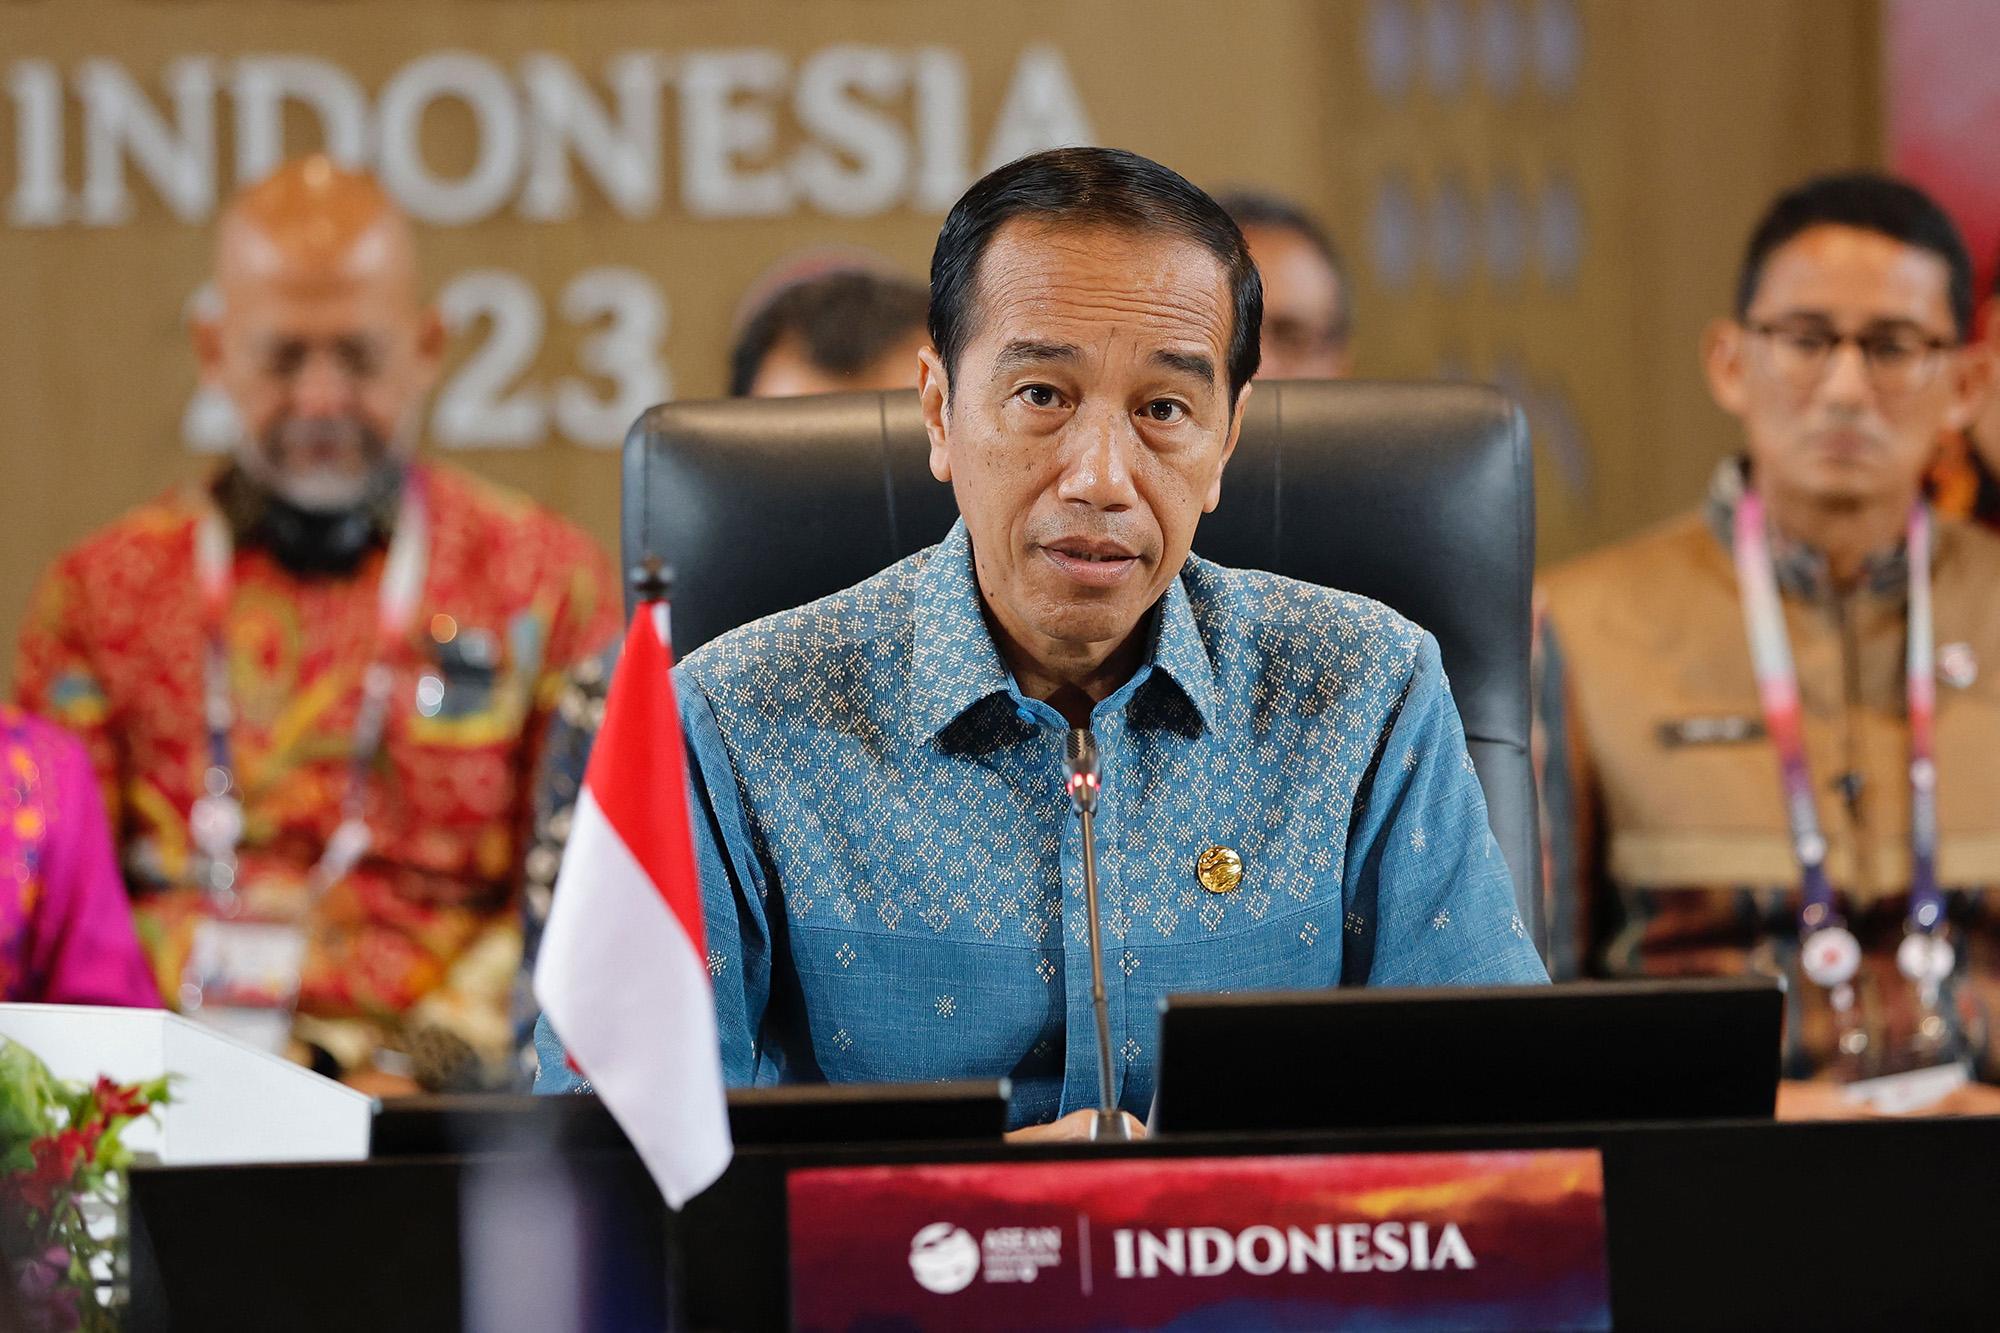 Indonesian President Joko Widodo attends the 15th Indonesia-Malaysia-Thailand Growth Triangle (IMT-GT) Summit on the sidelines of the ASEAN Summit in Labuan Bajo on May 11.